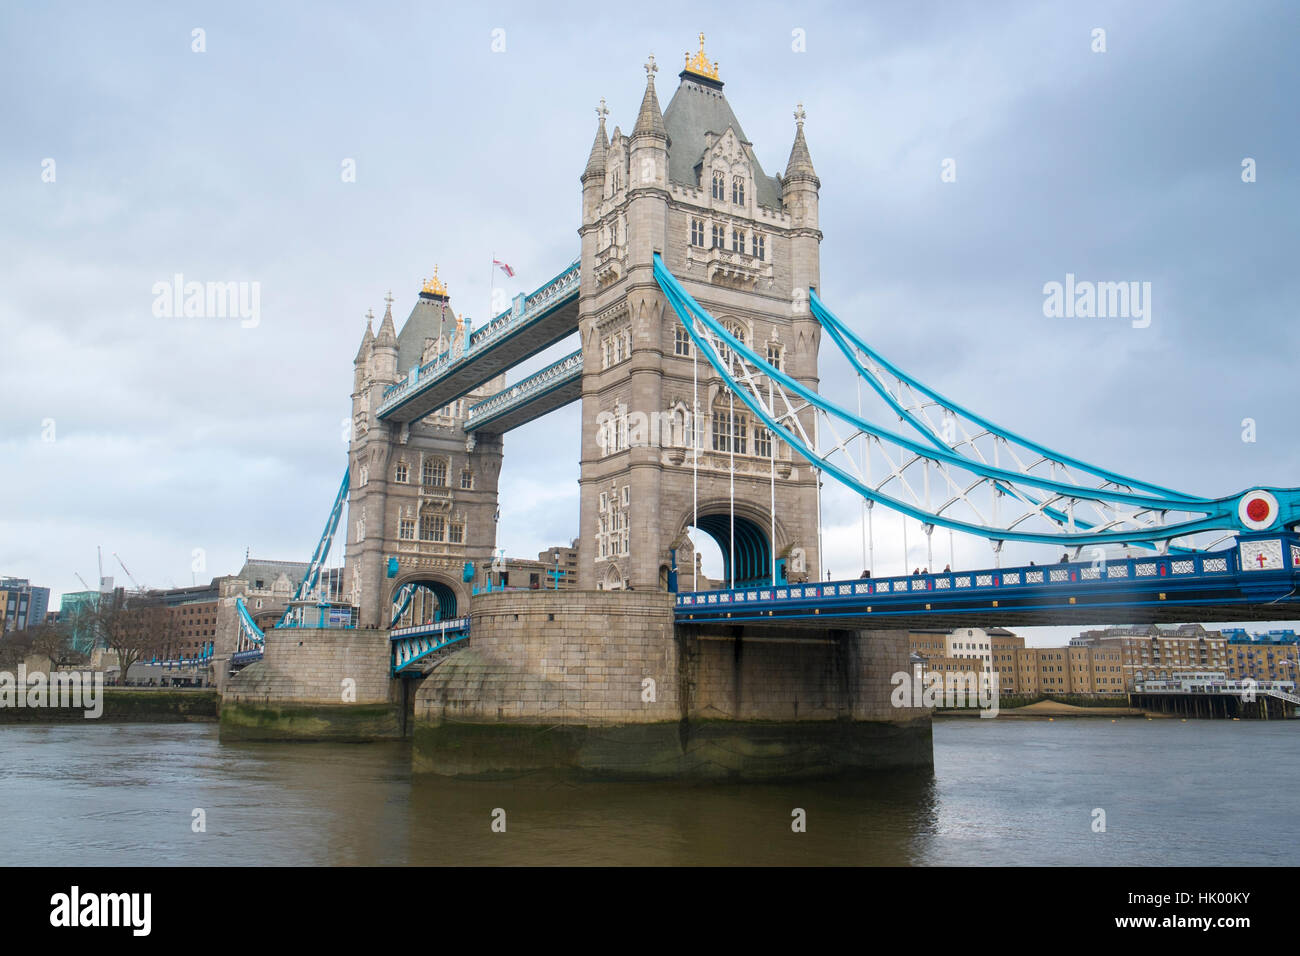 Tower Bridge in London spanning the River Thames,England,UK,2015 Stock Photo